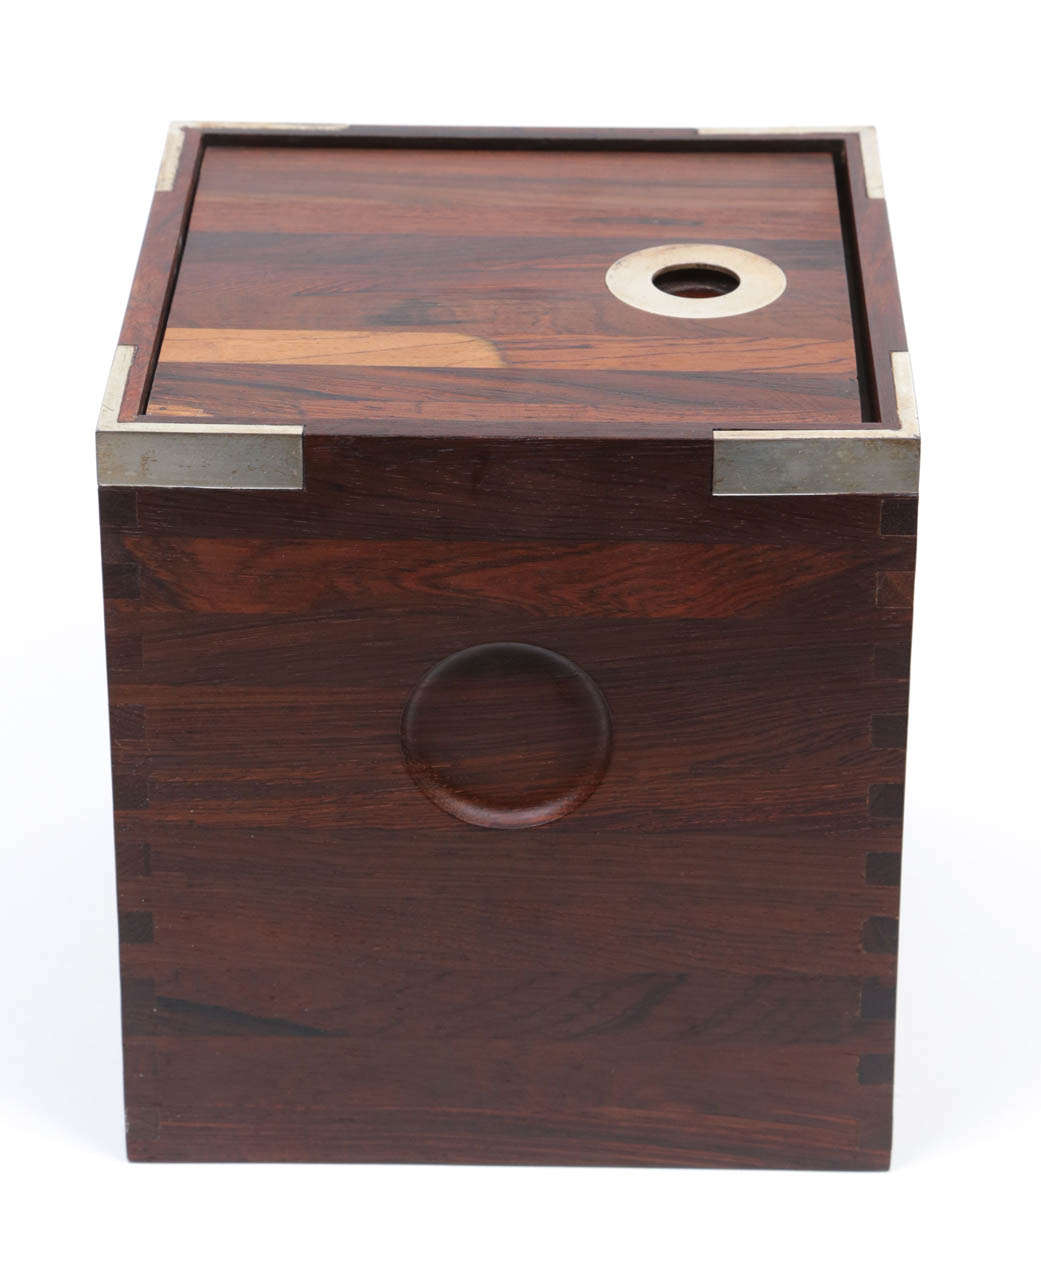 A rare cube-form ice bucket made from old-growth Brazilian rosewood, with finger-jointed sides and silver-plated corners and finger-lift.  Designed and produced by Richard Nissen, maker of all the wooden pieces for Dansk Designs.